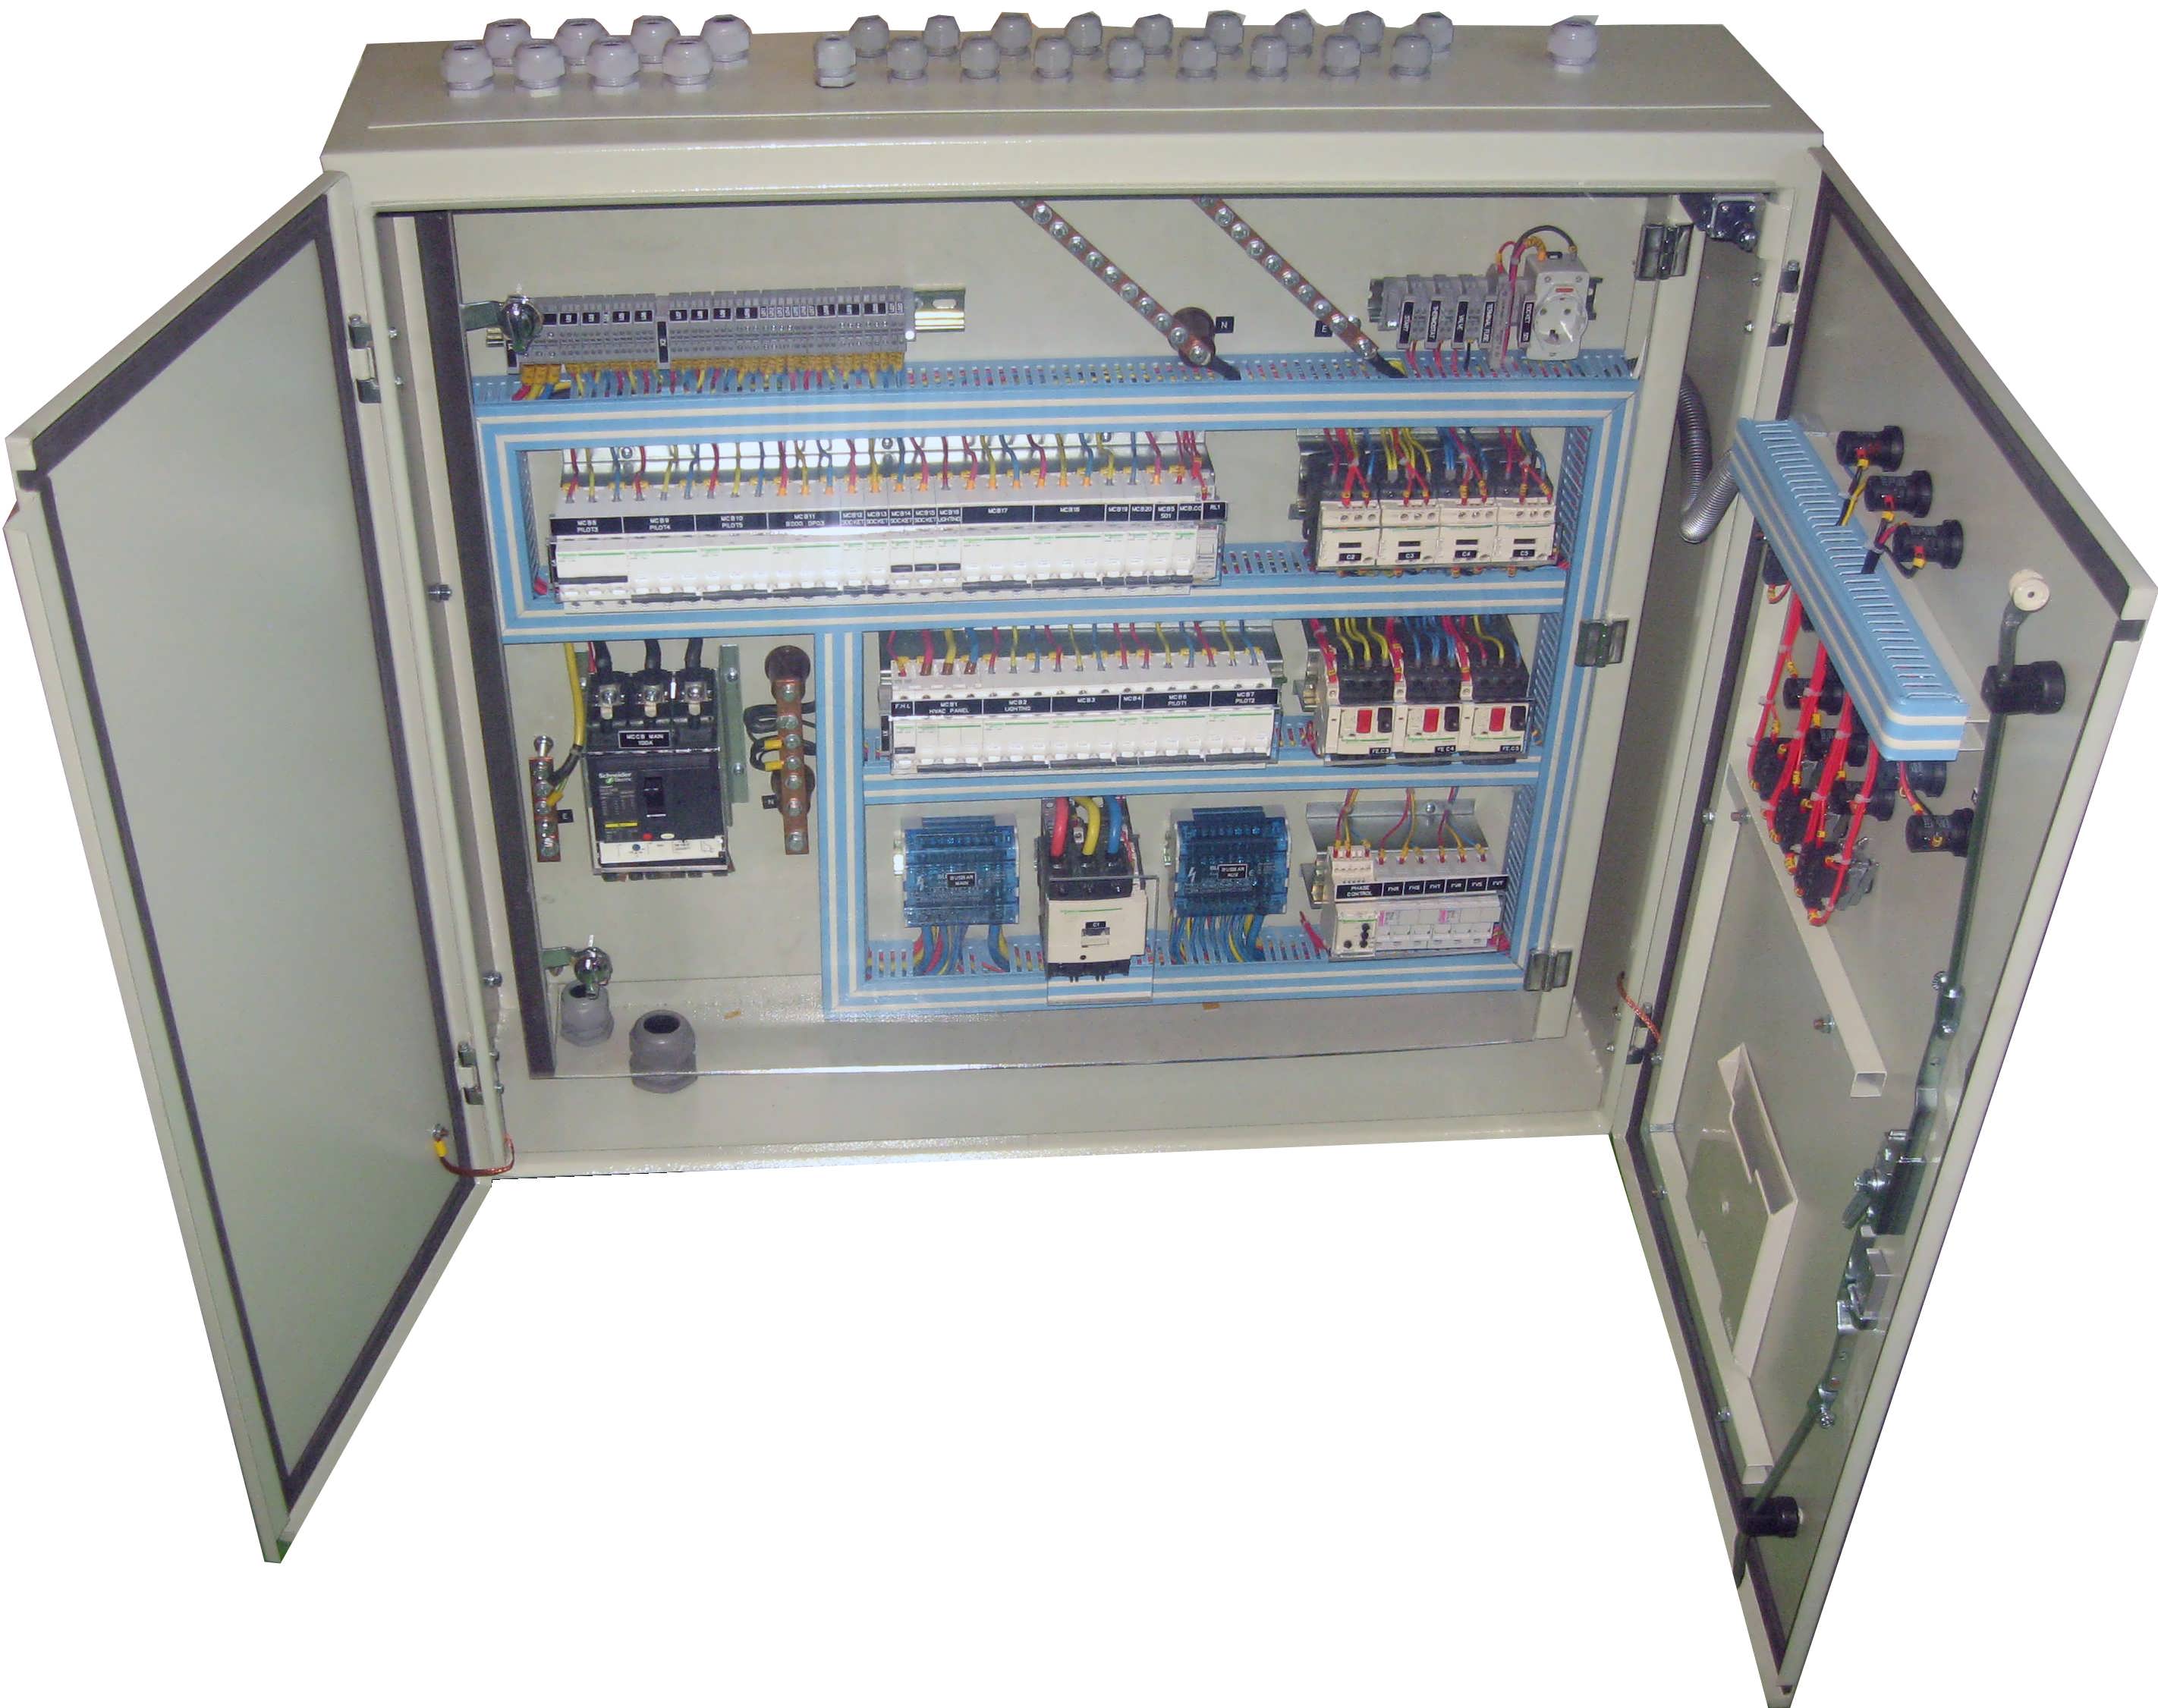 Wall mounted control and motor protection